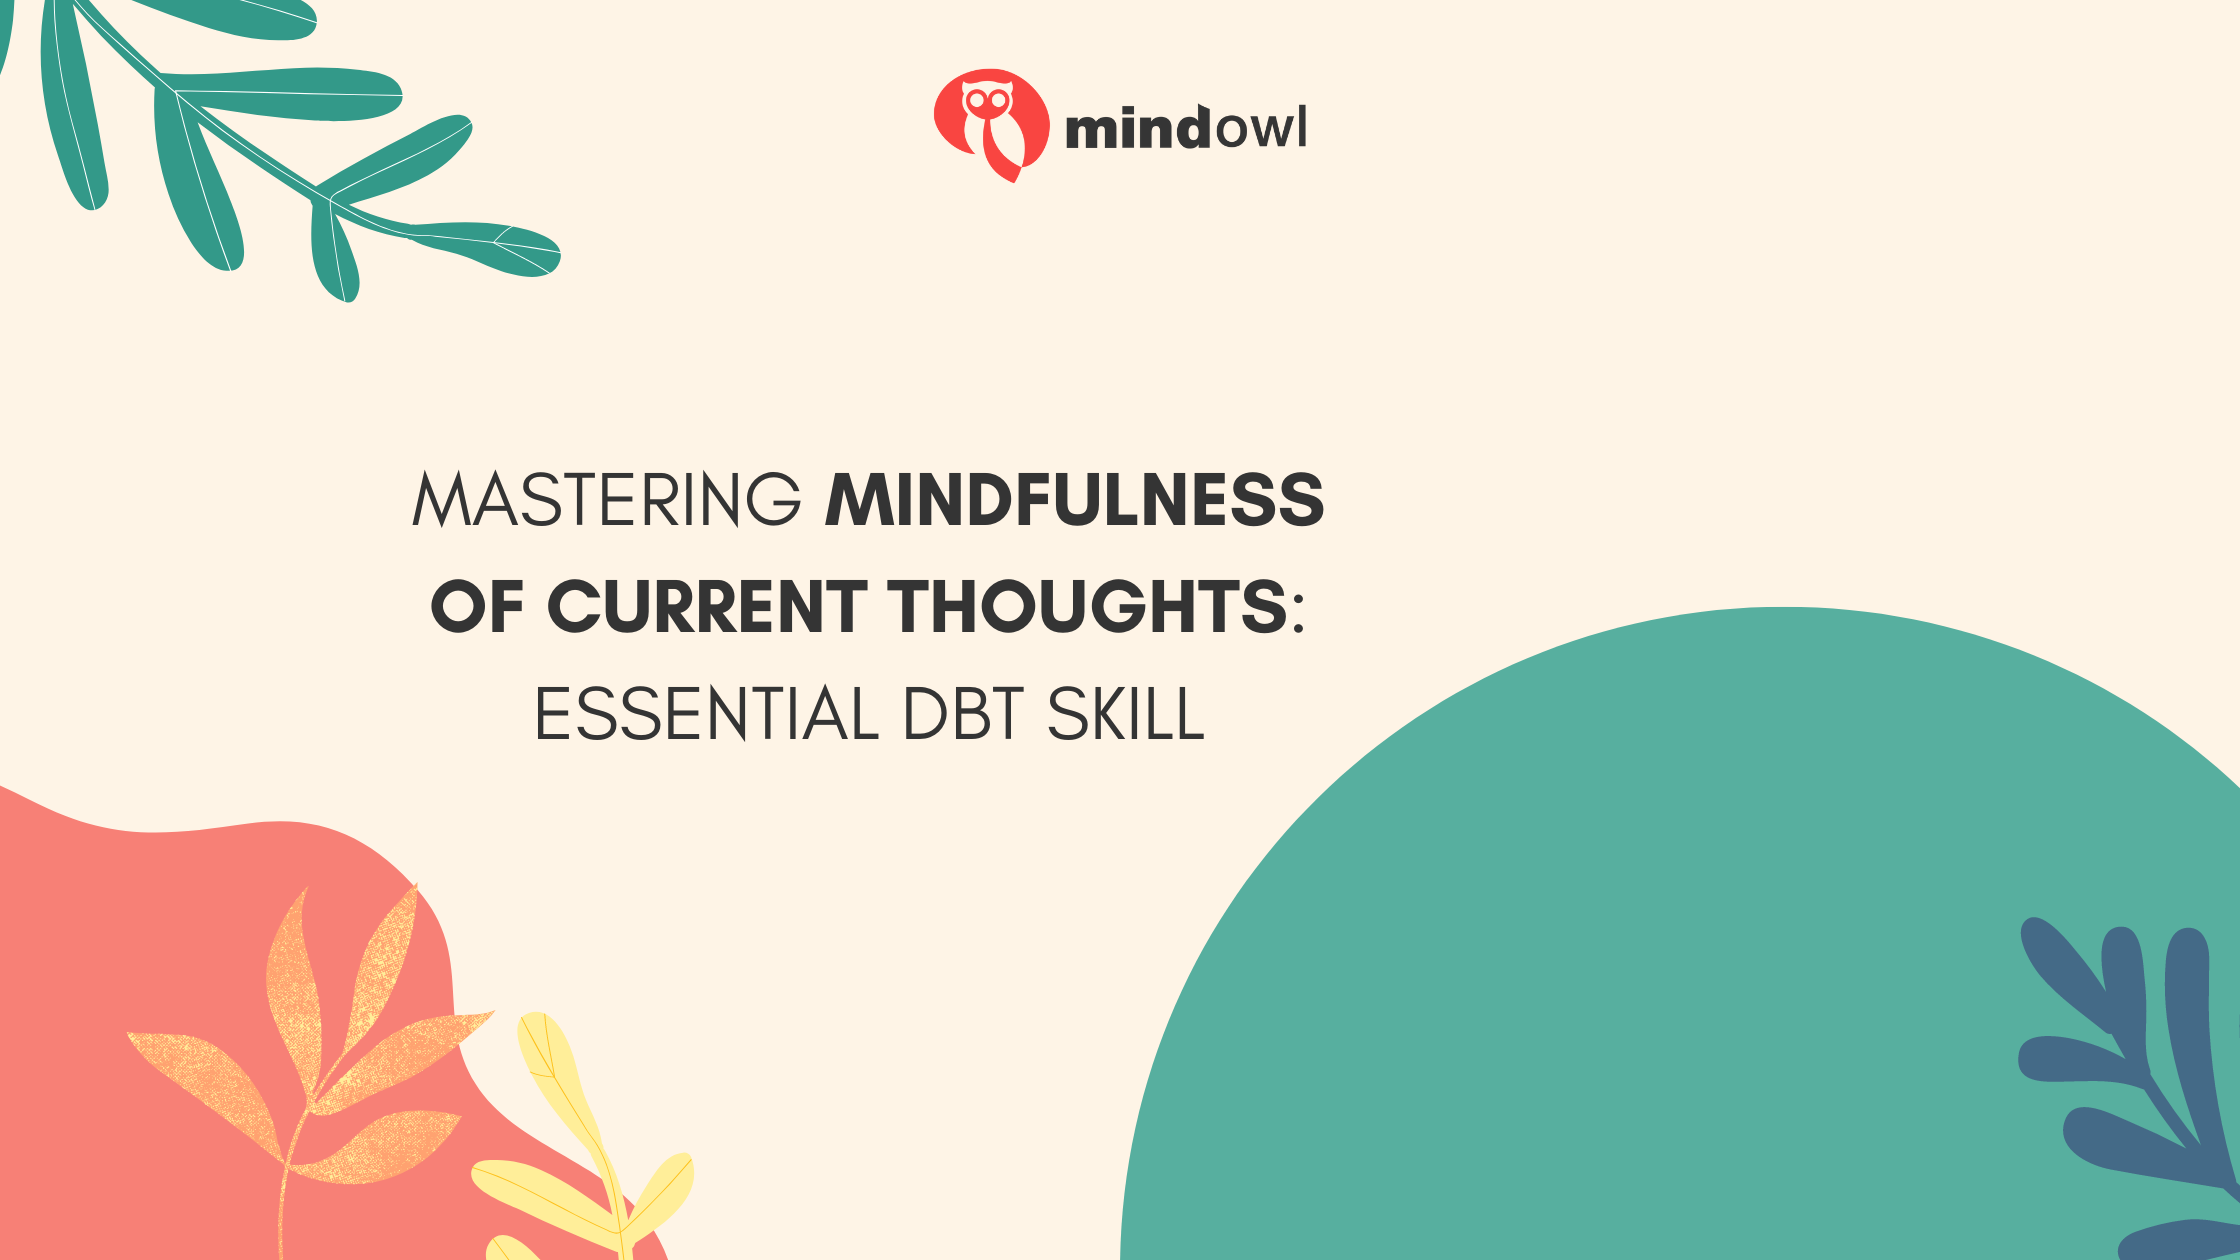 Mastering Mindfulness Of Current Thoughts: Essential DBT Skill